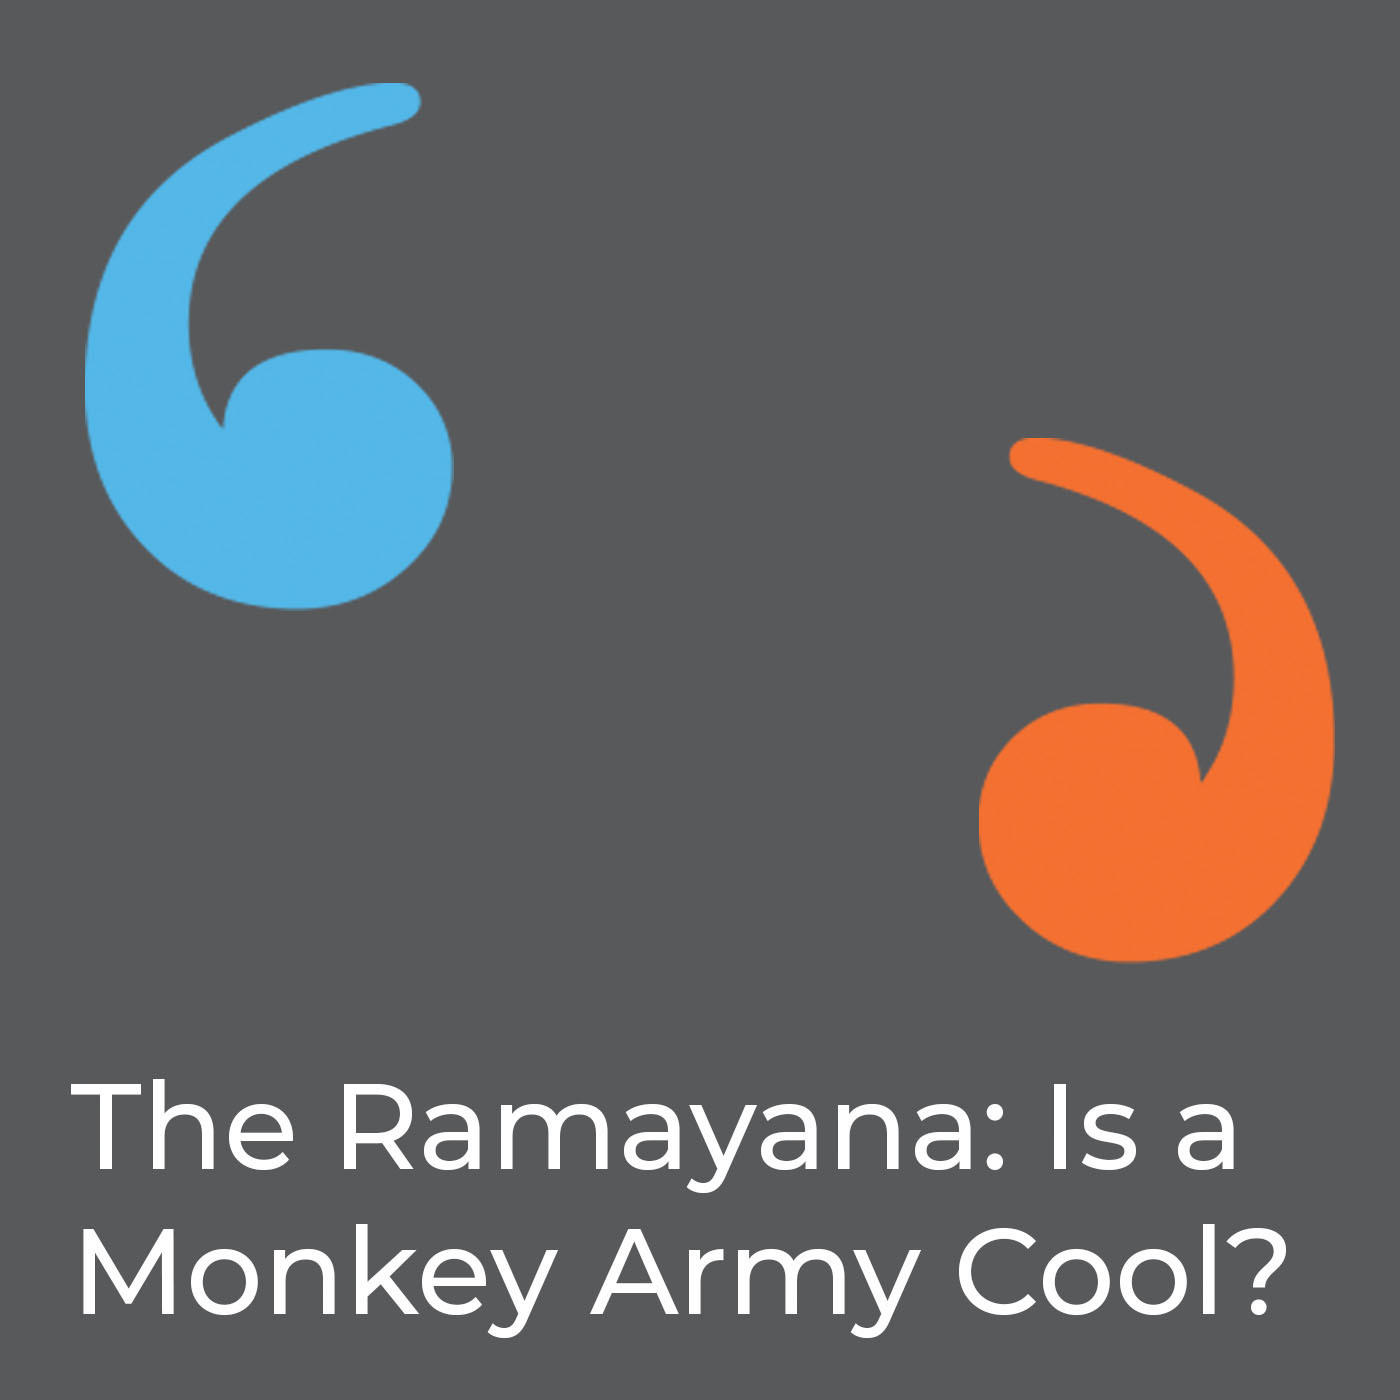 The Ramayana: Is A Monkey Army Cool Or Uncool?